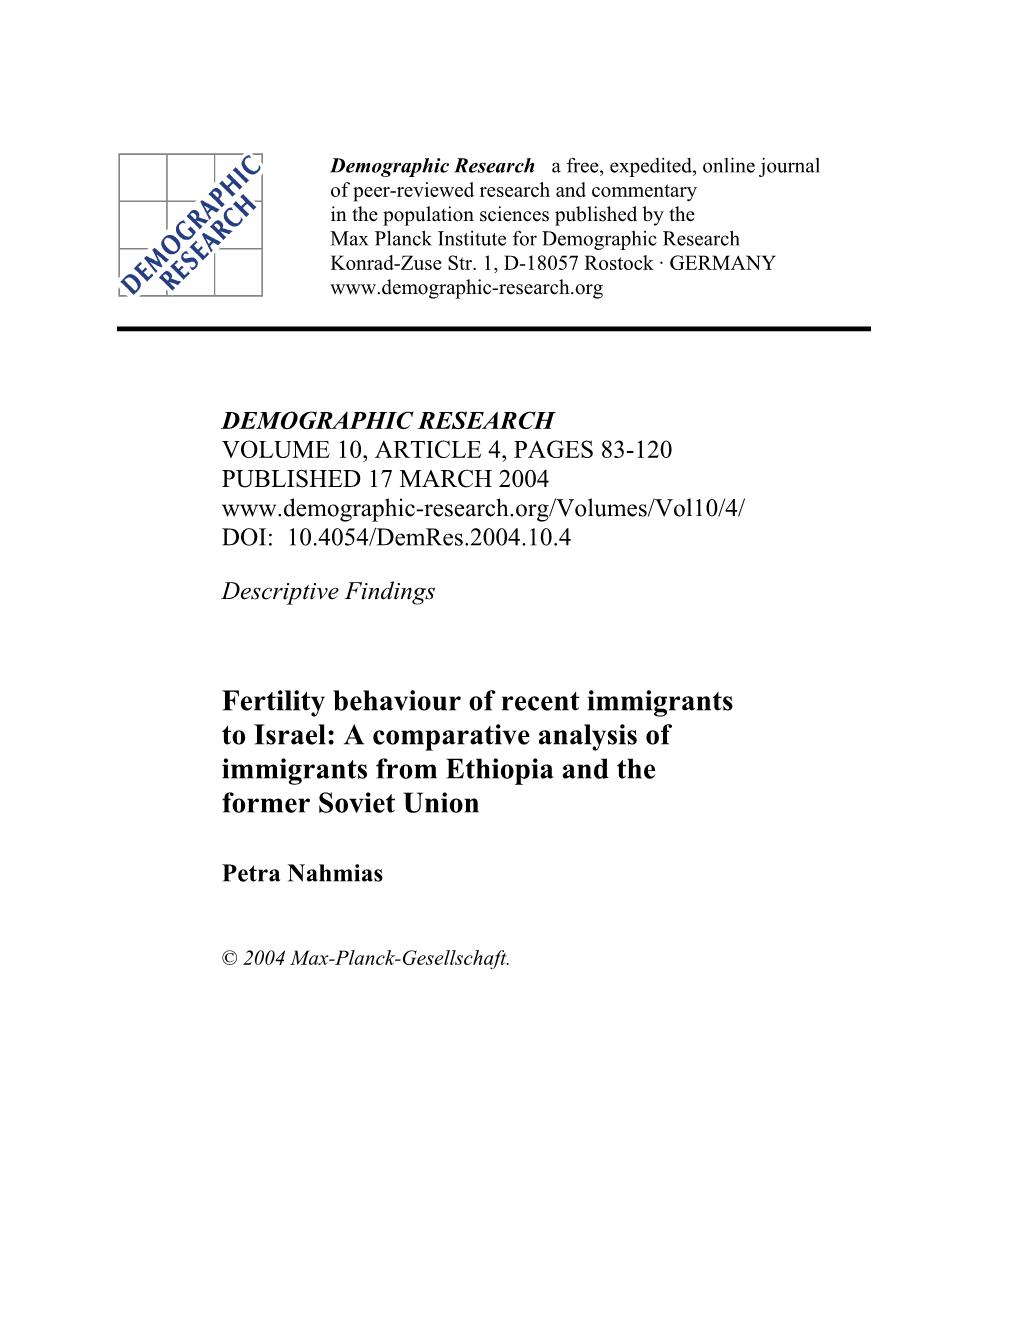 Fertility Behaviour of Recent Immigrants to Israel: a Comparative Analysis of Immigrants from Ethiopia and the Former Soviet Union